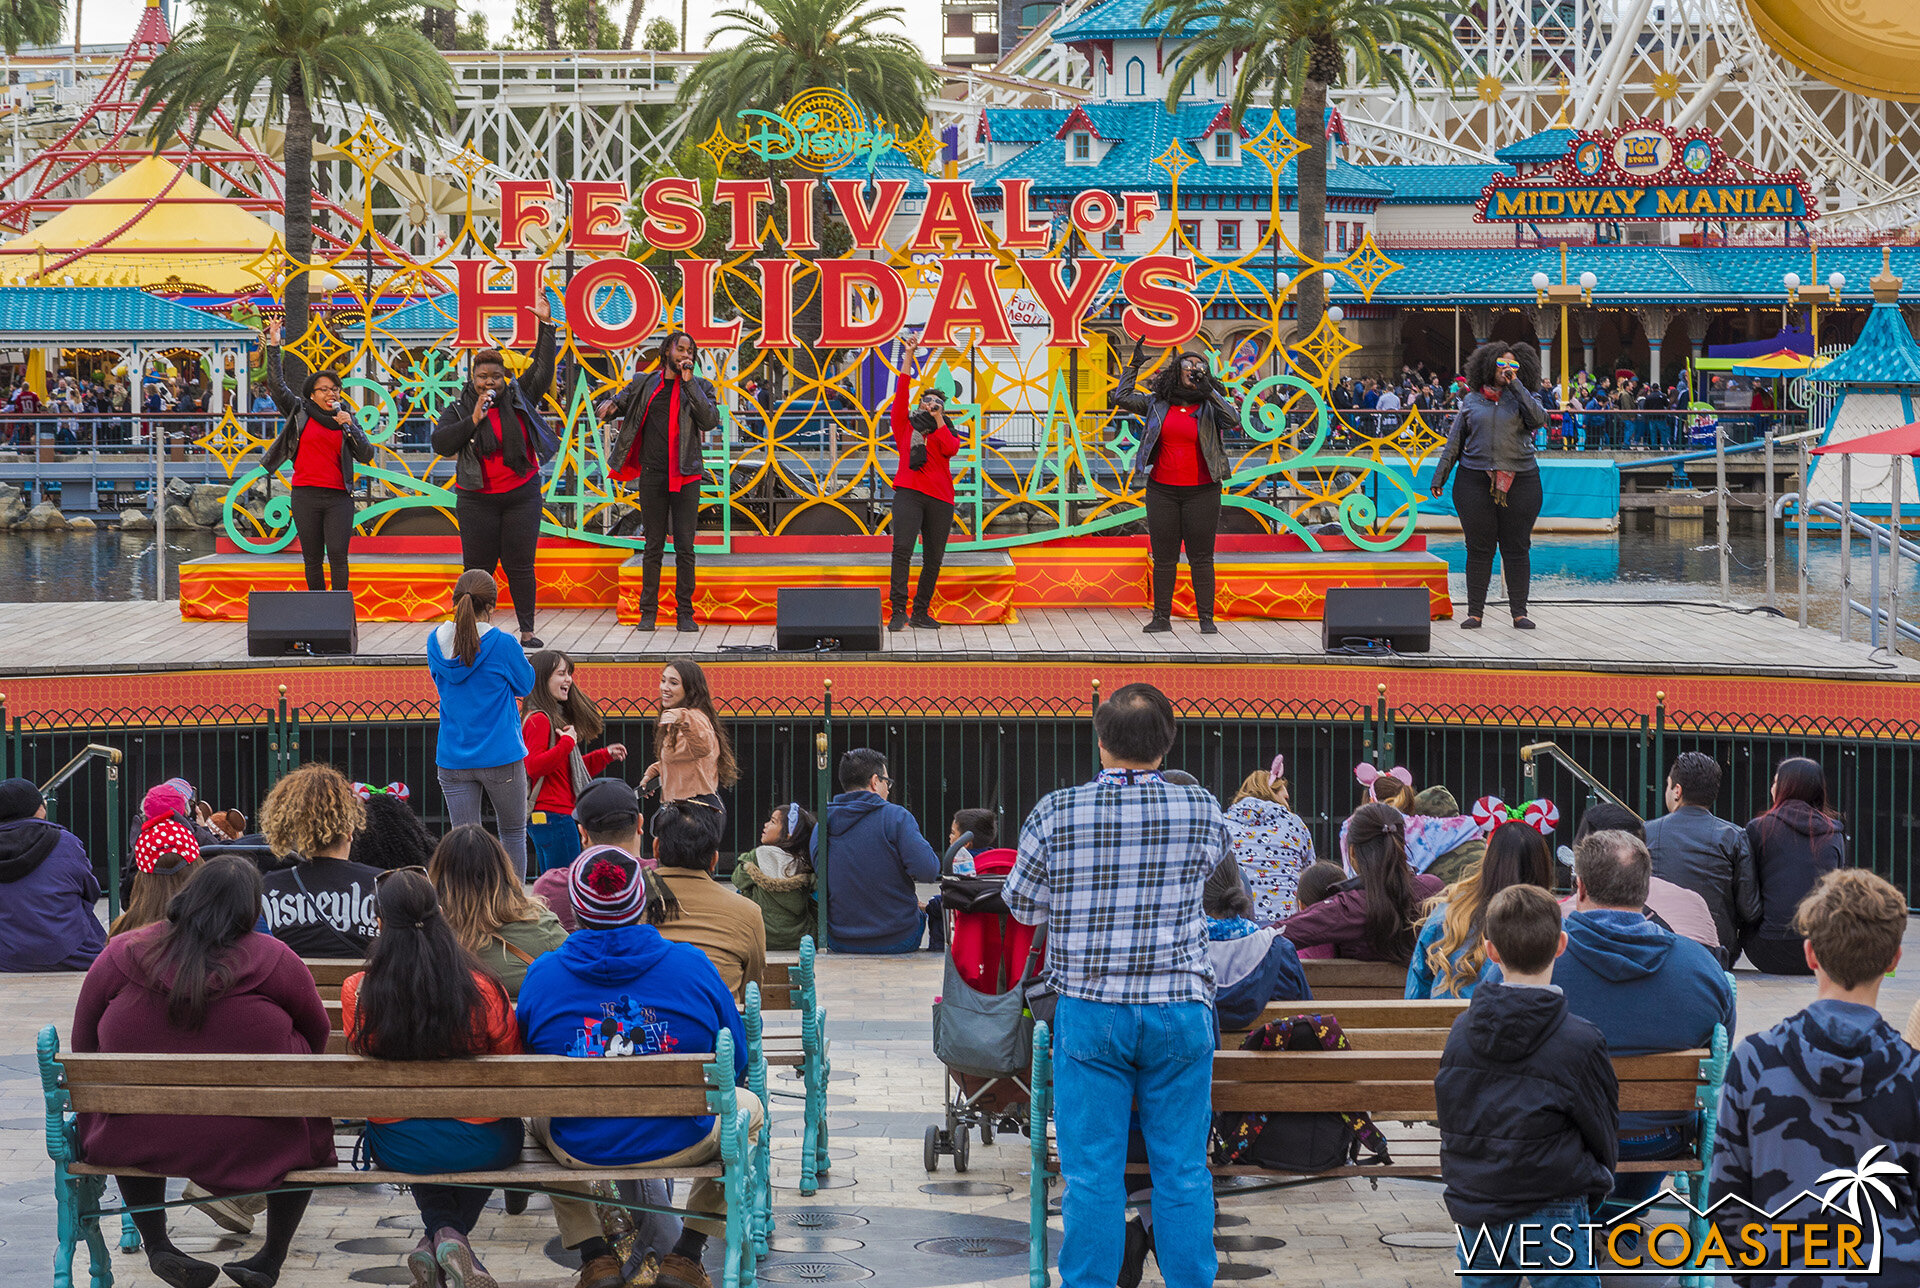  The Sound performs at the Paradise Park main stage as well as on the side stage in Pacific Wharf. 